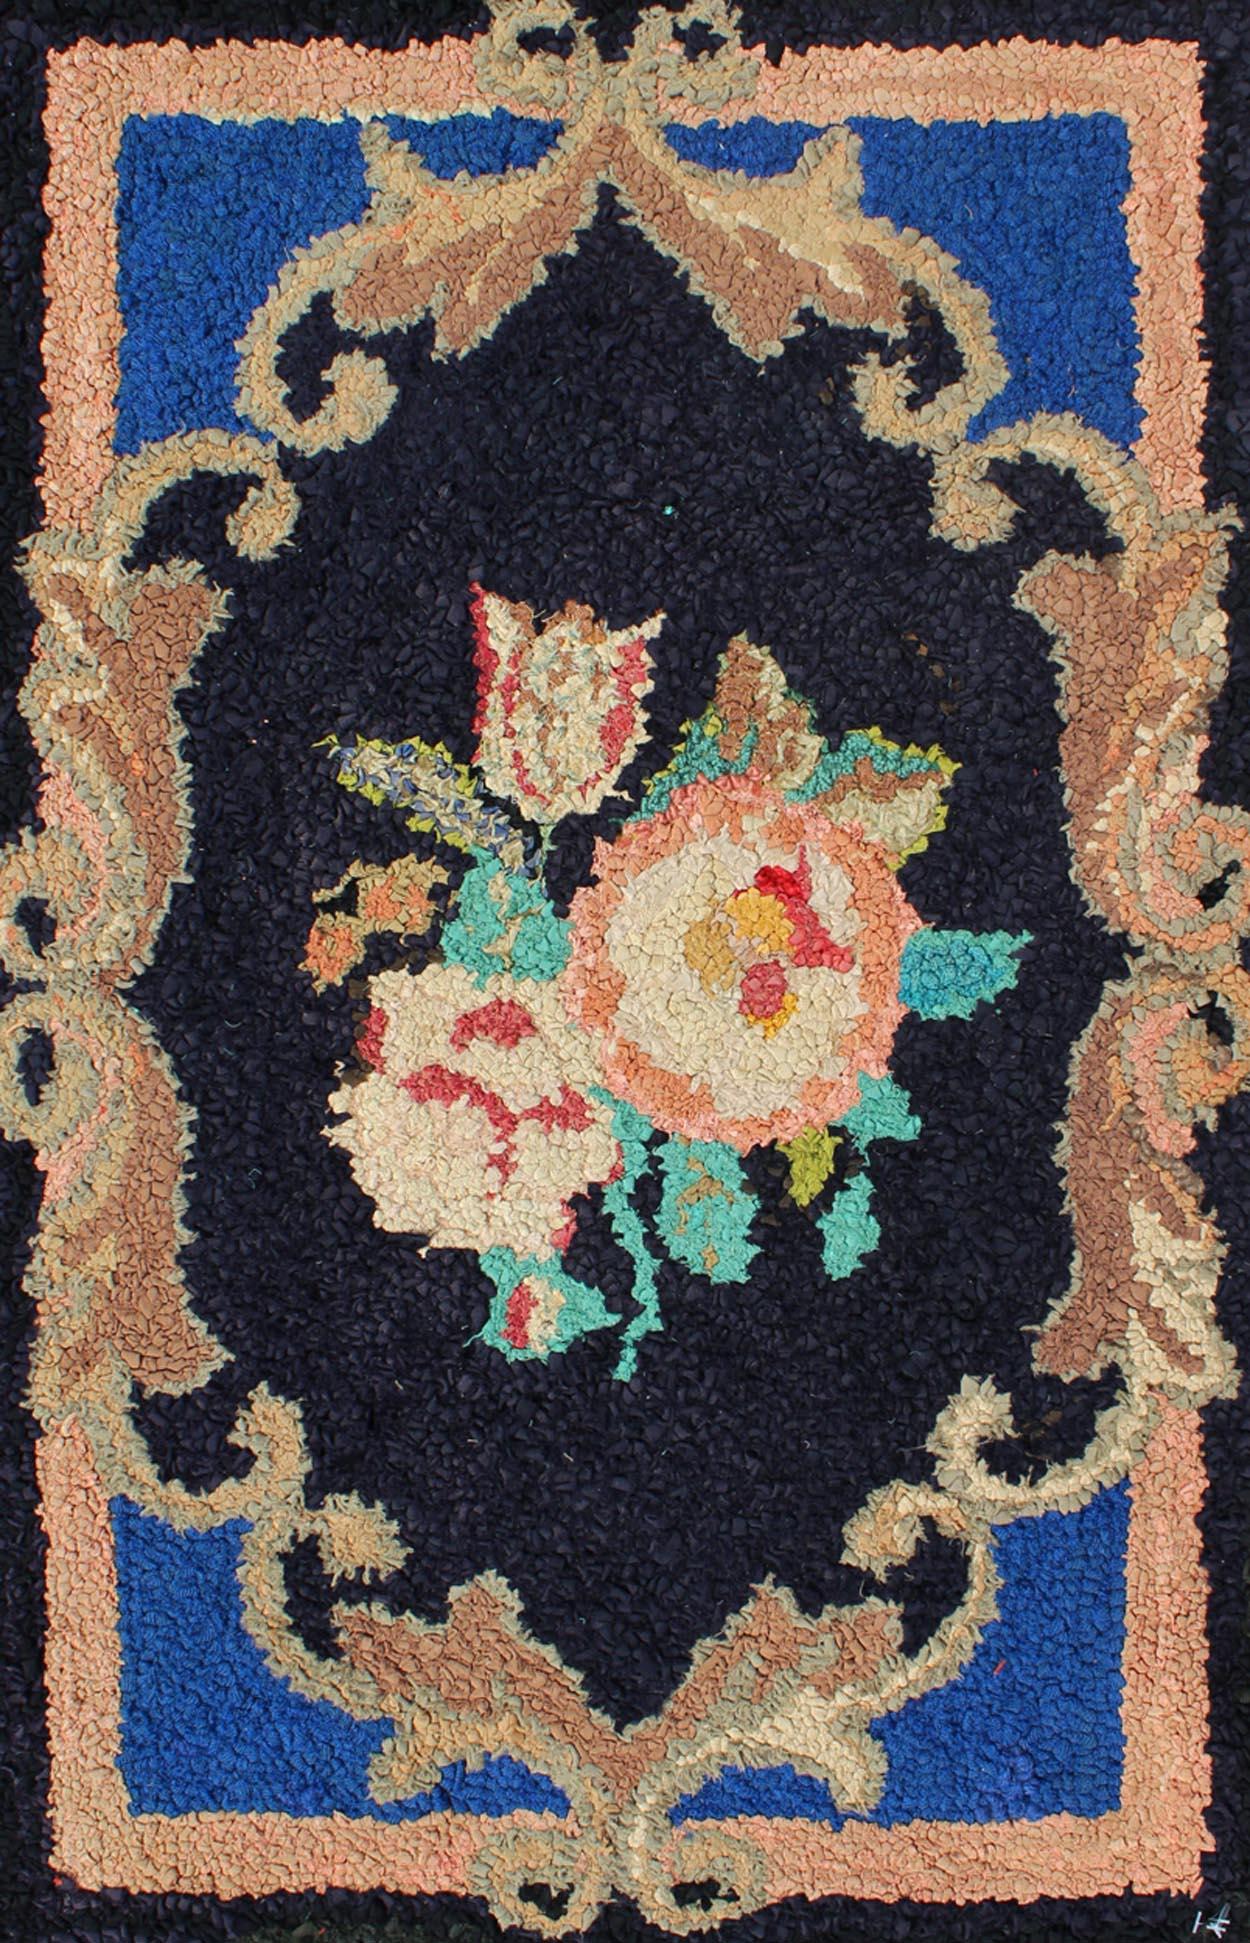 Hand-Woven Antique American Hooked Rug with Large Floral Medallion in Black Background For Sale